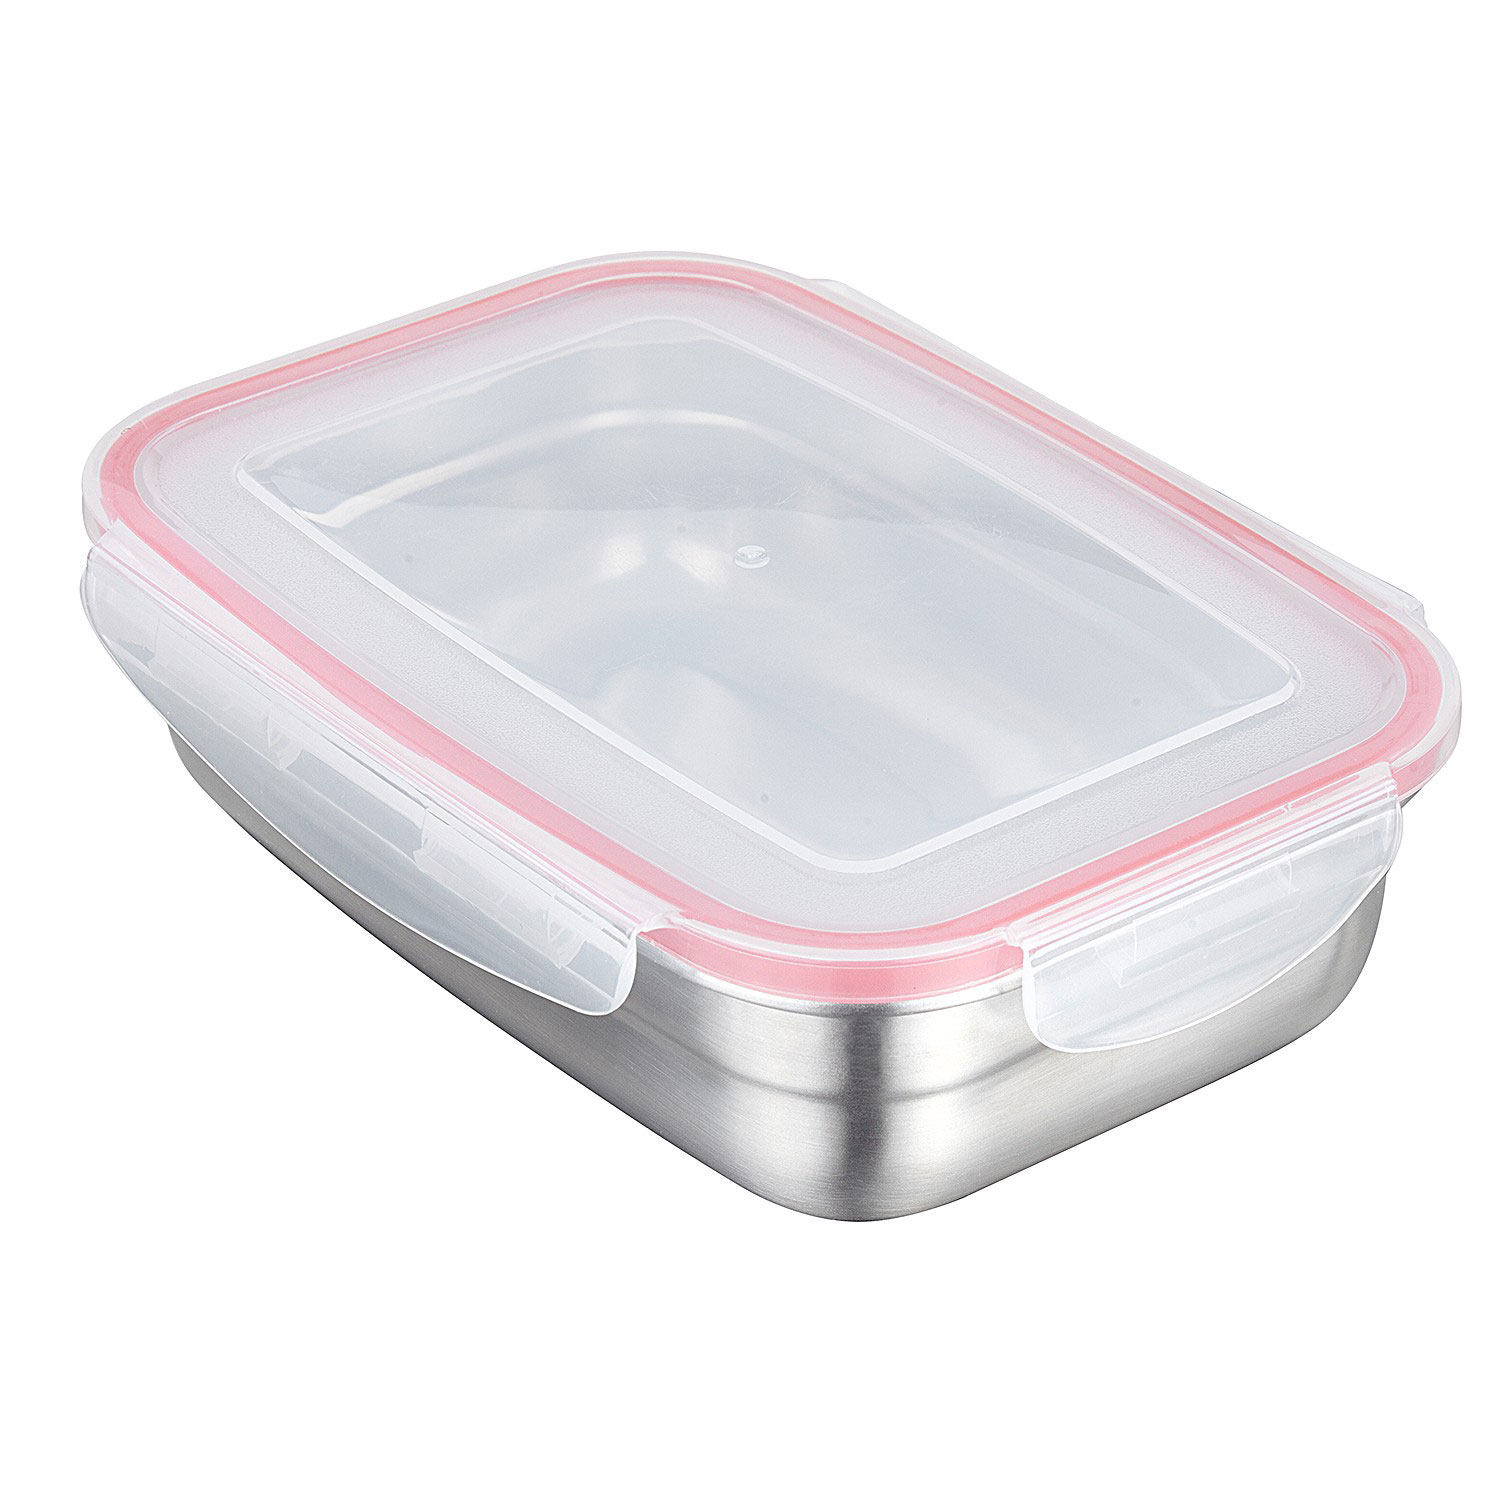 PAL INOX FOOD CONTAINER 600ML